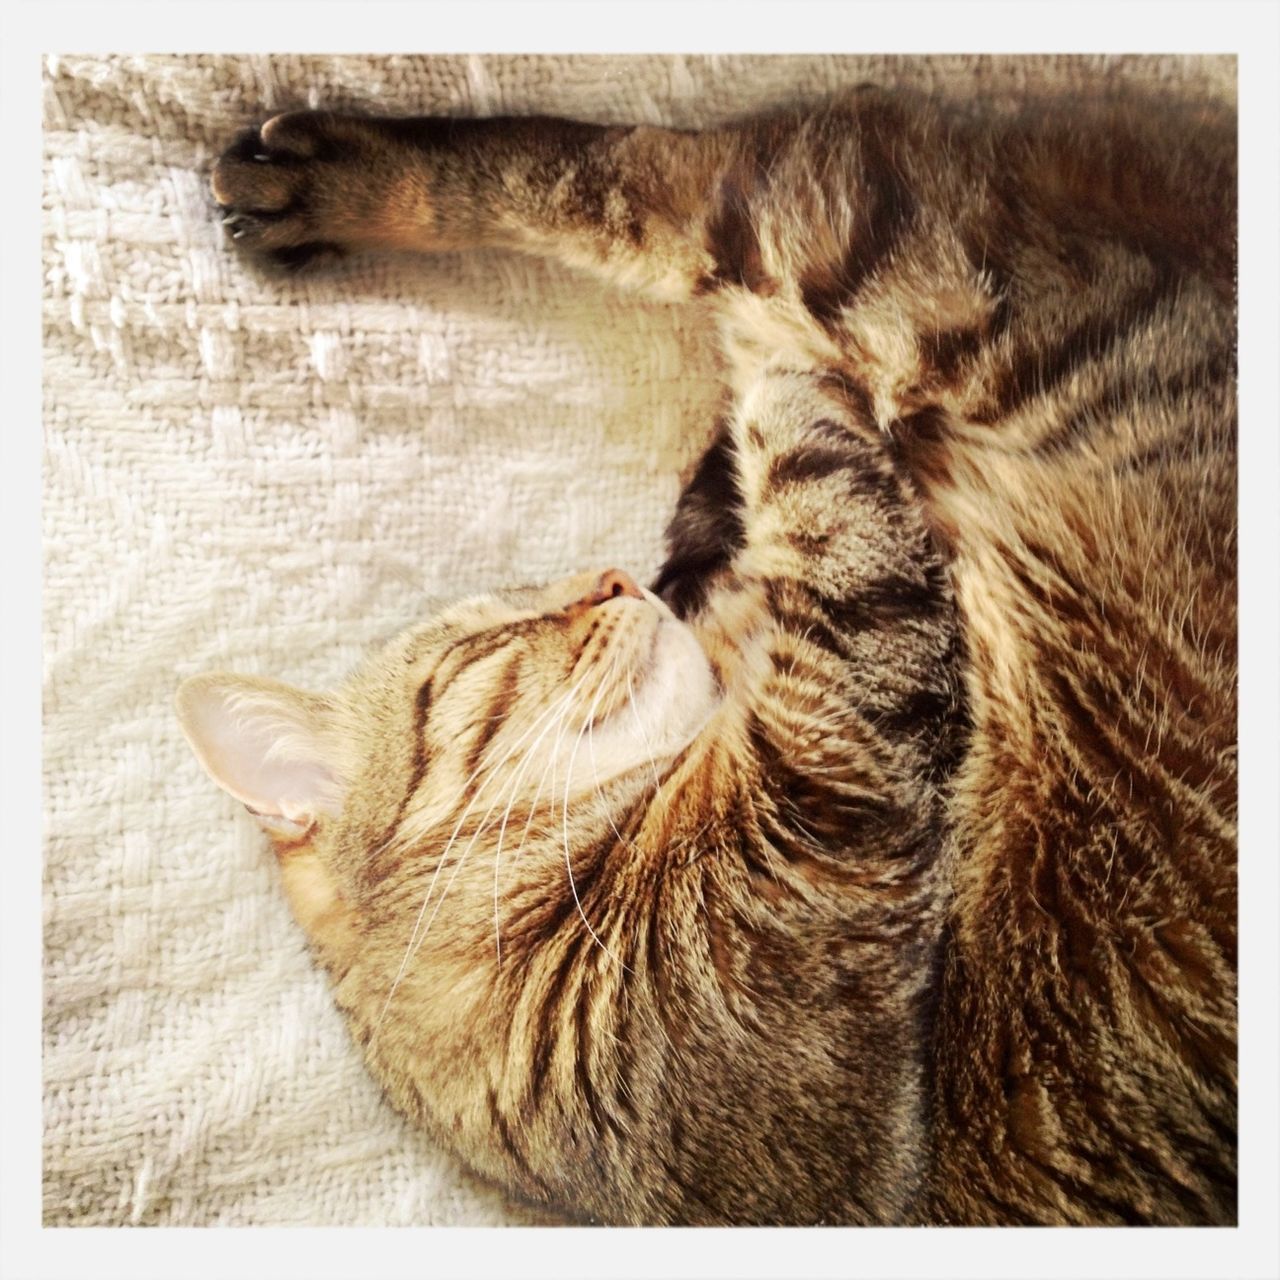 transfer print, animal themes, one animal, indoors, auto post production filter, sleeping, mammal, pets, domestic animals, domestic cat, relaxation, cat, resting, close-up, feline, animal body part, eyes closed, high angle view, lying down, animal head